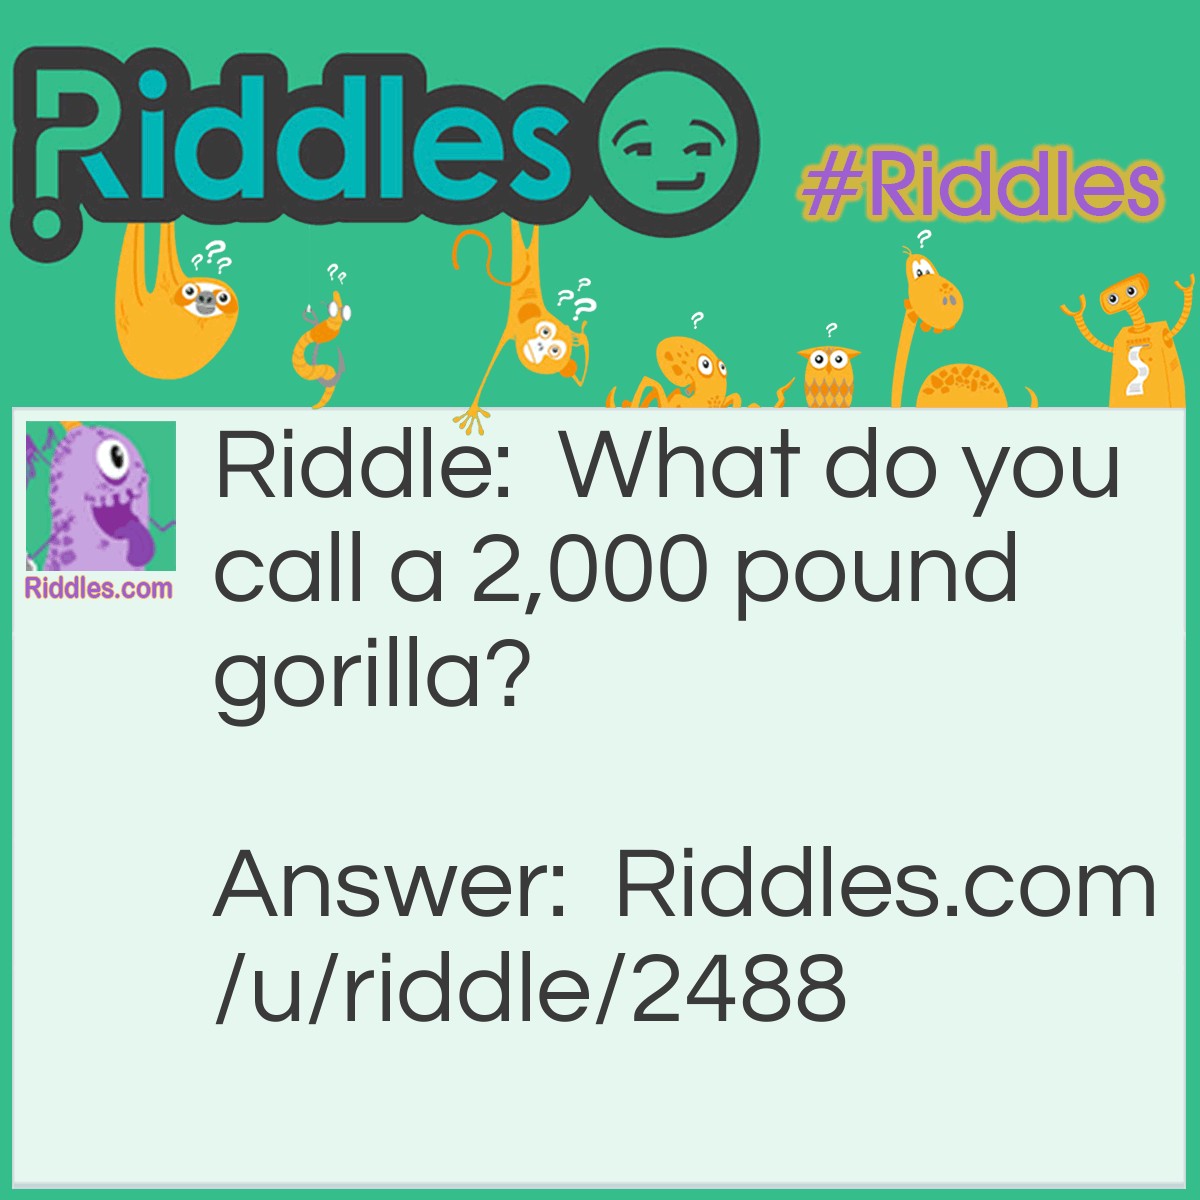 Riddle: What do you call a 2,000 pound gorilla? Answer: Sir.